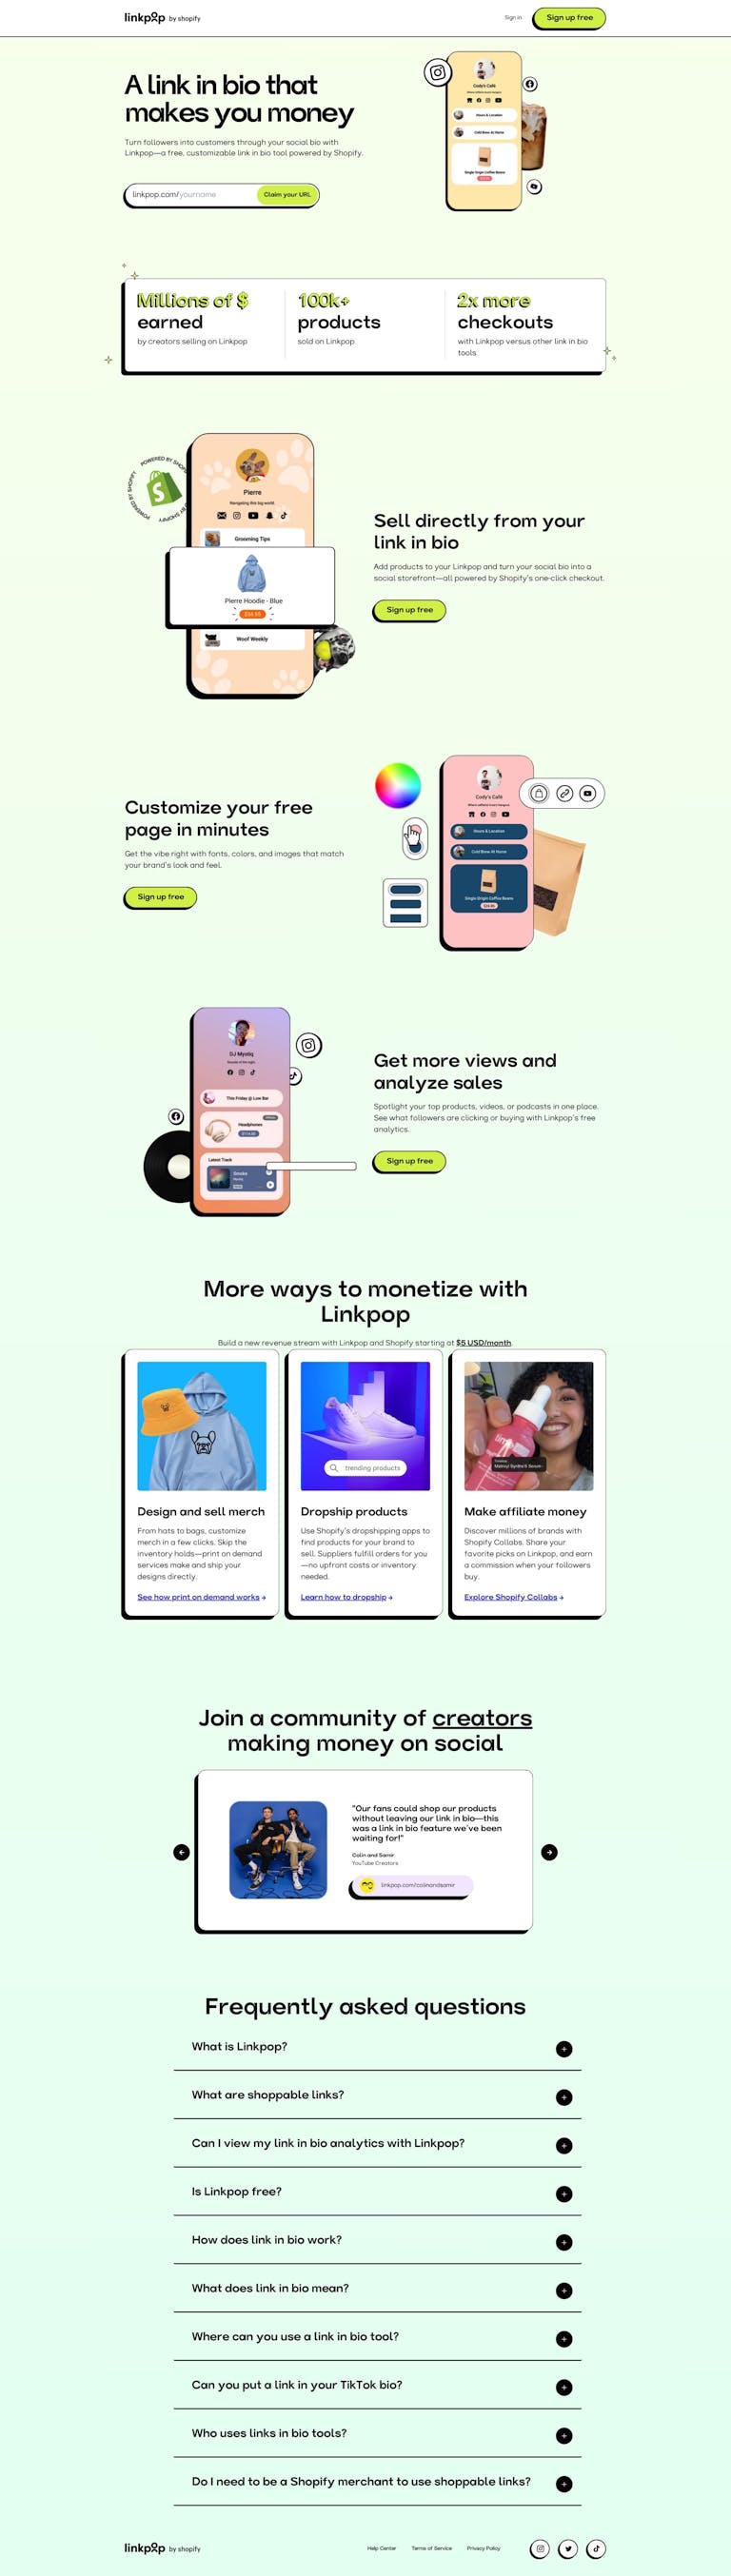 Screenshot of Link In Bio for Commerce by Shopify